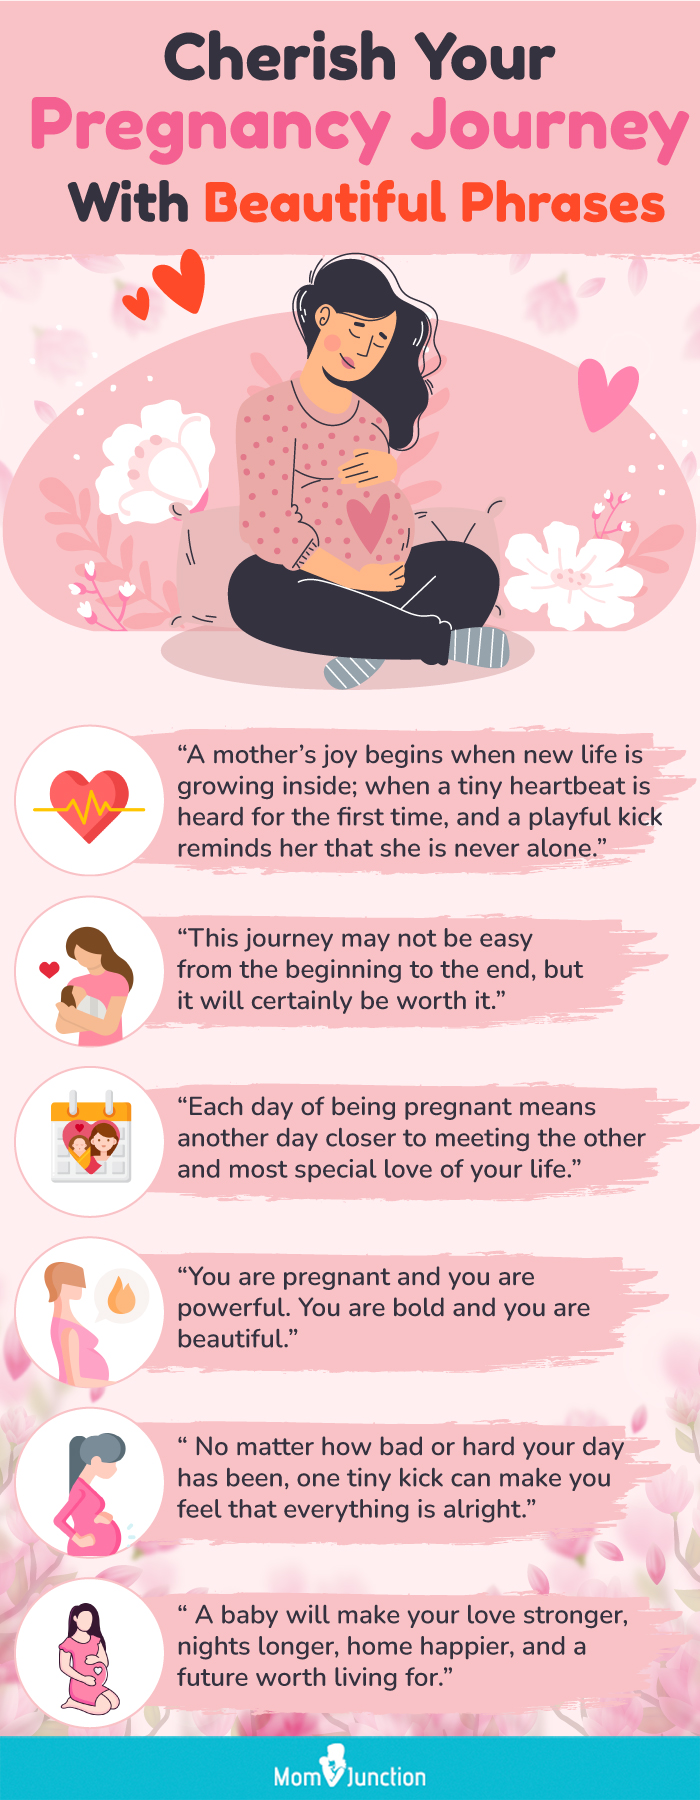 cherish your pregnancy journey with beautiful phrases (infographic)